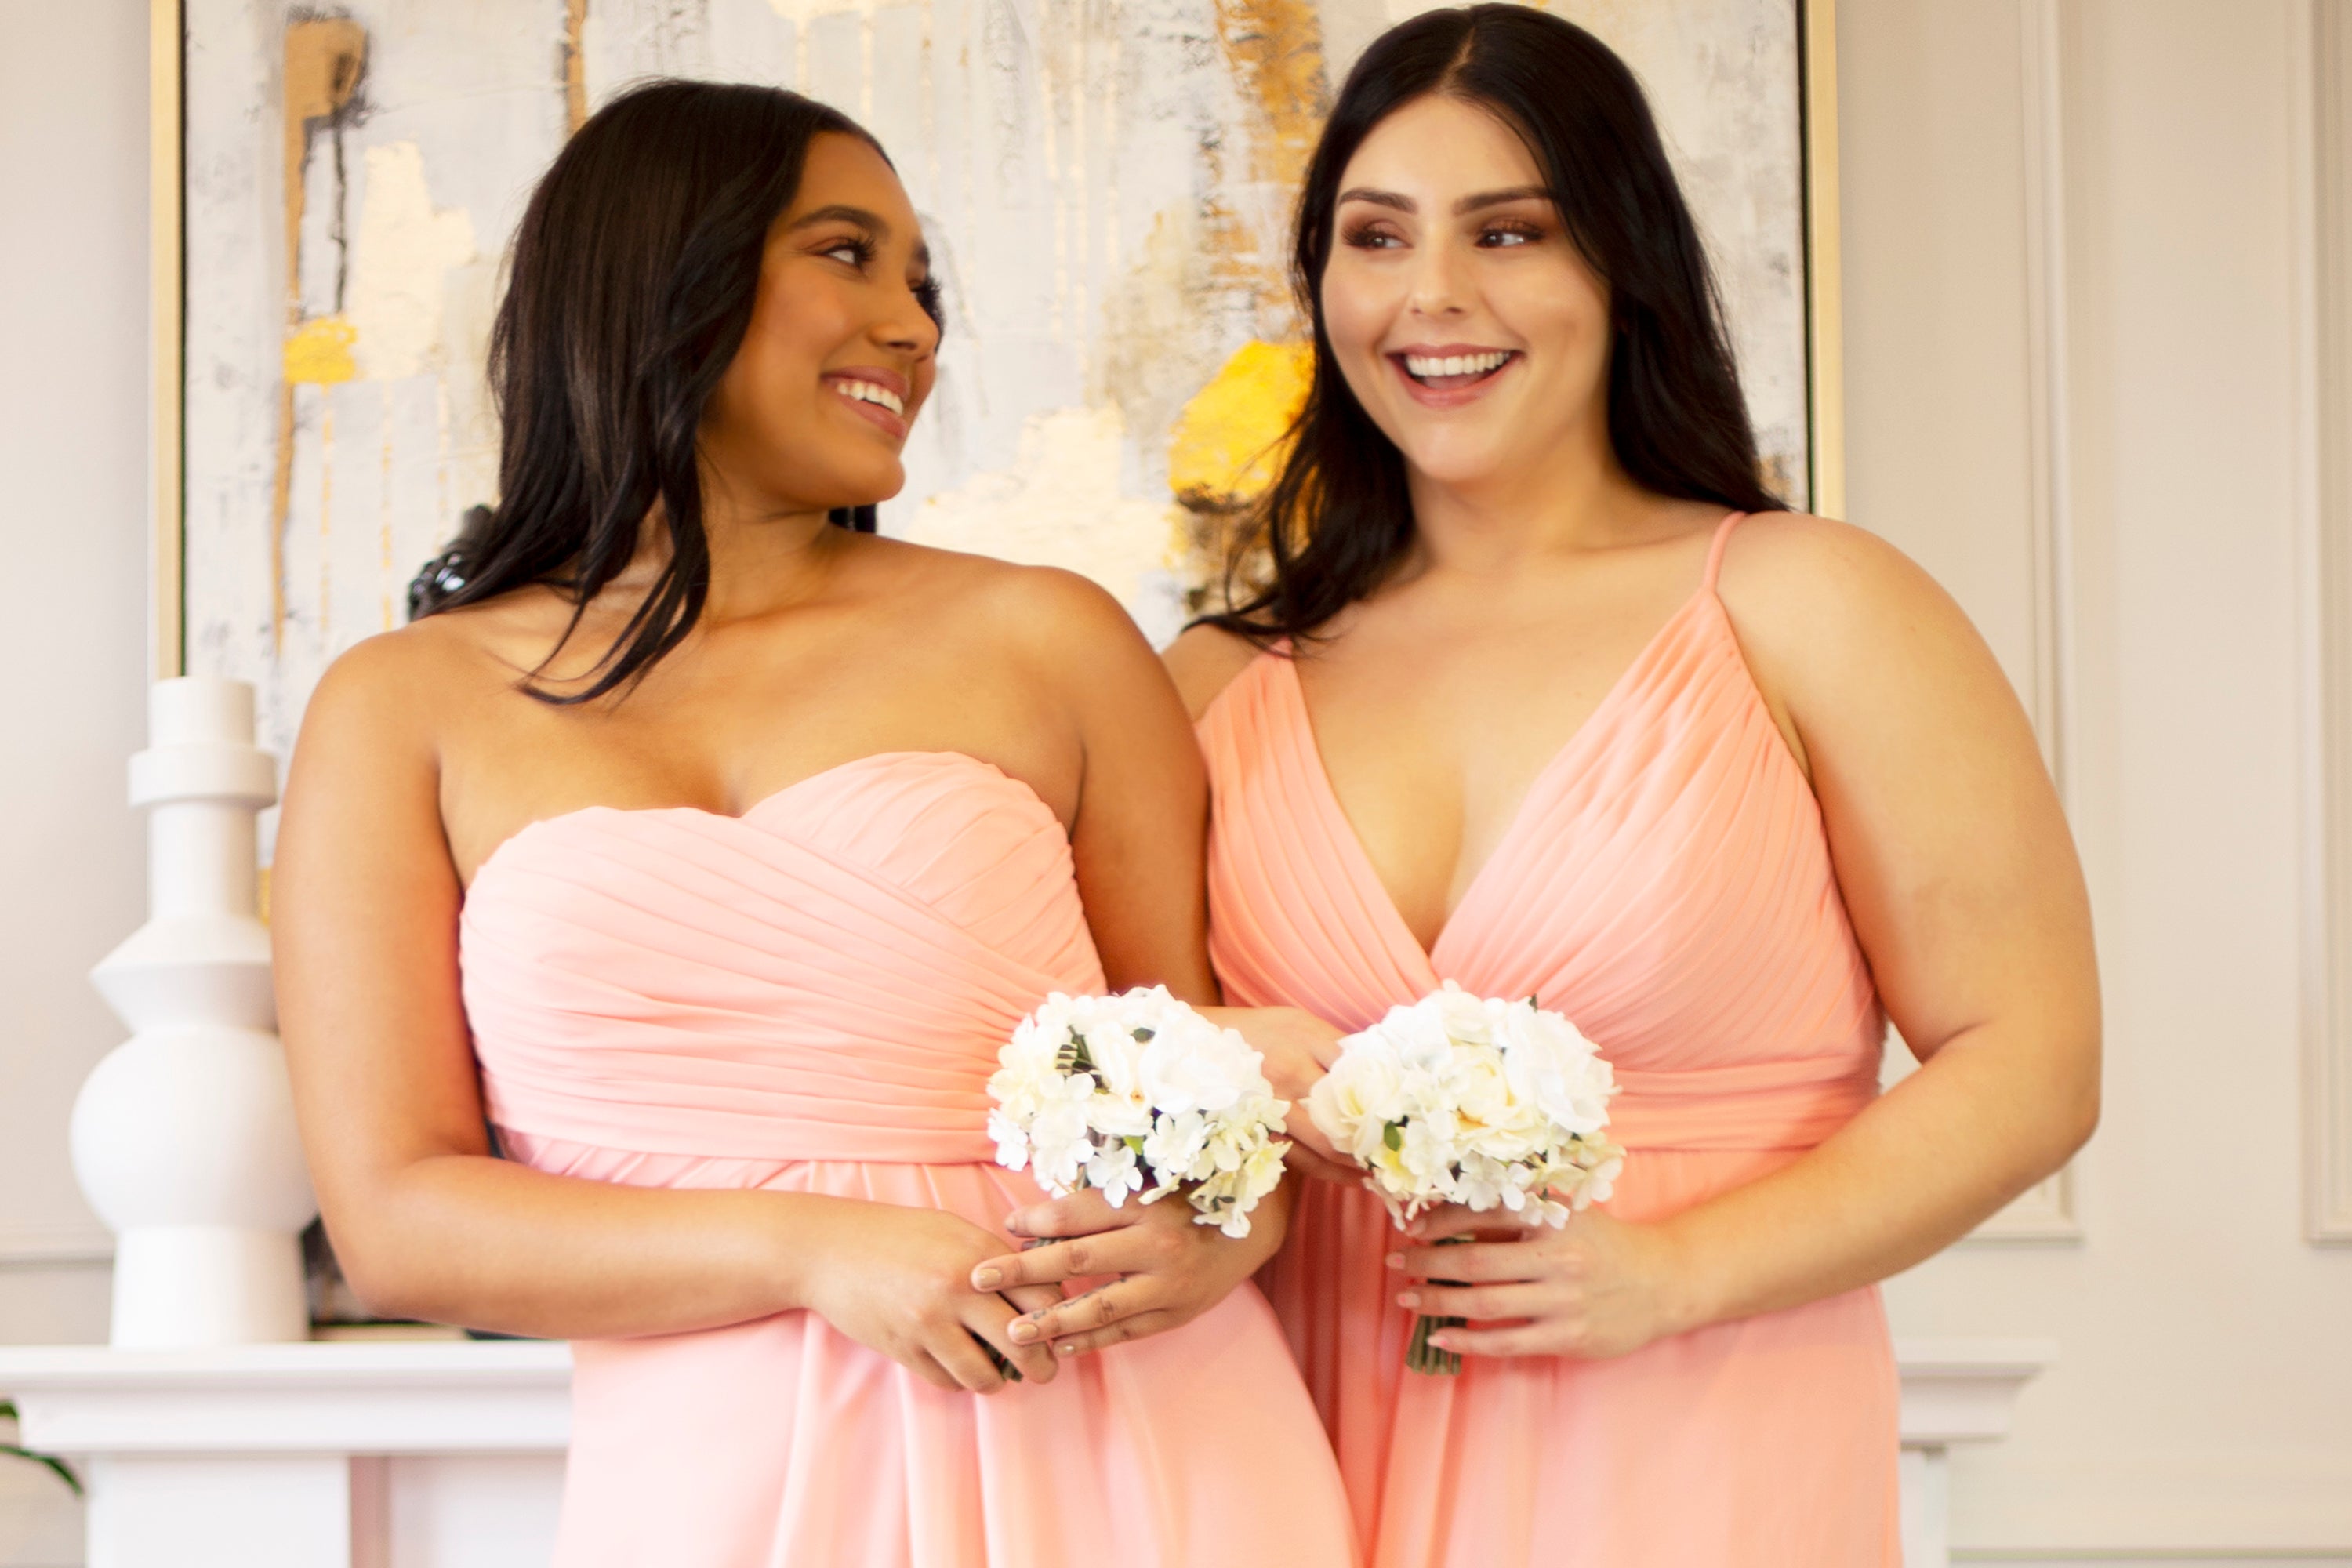 Bridesmaid Checklist: Did You Finish Packing Yet